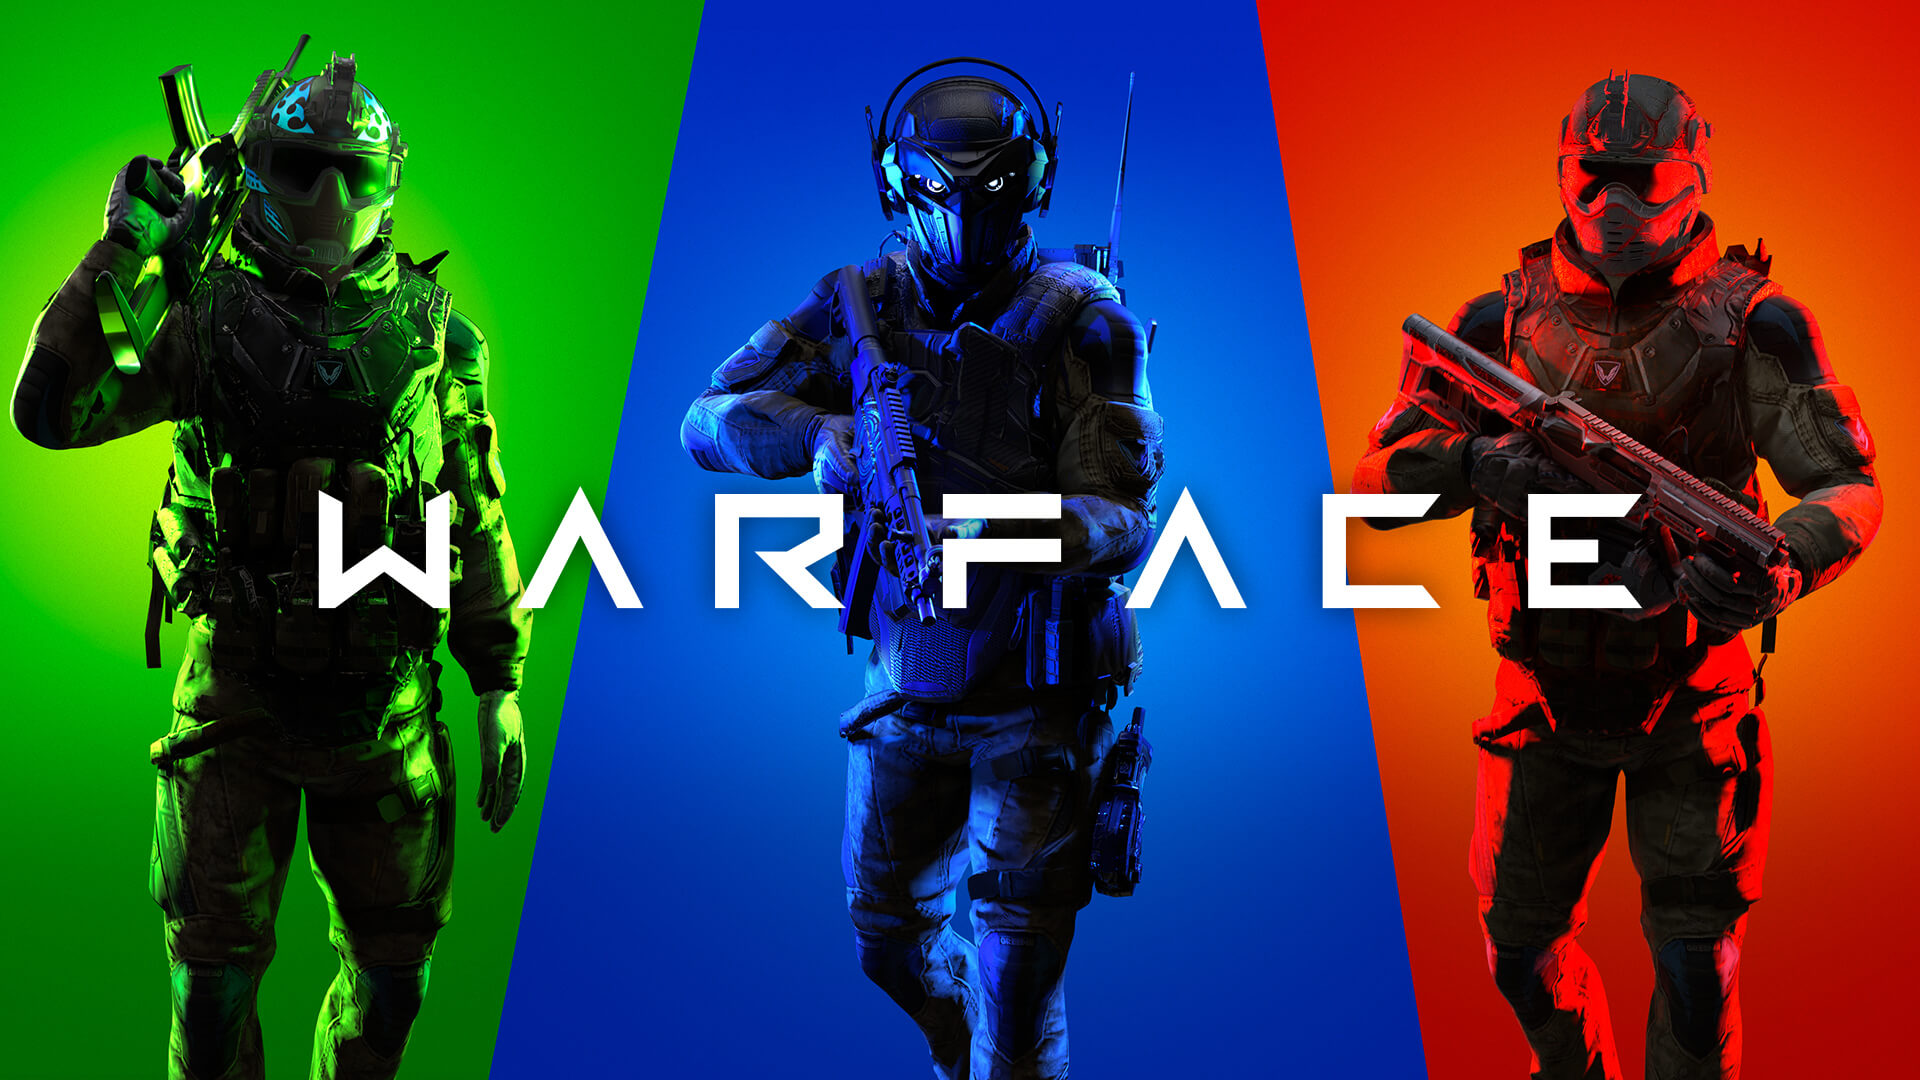 Multiplayer shooter Warface prepares for relaunch with new name